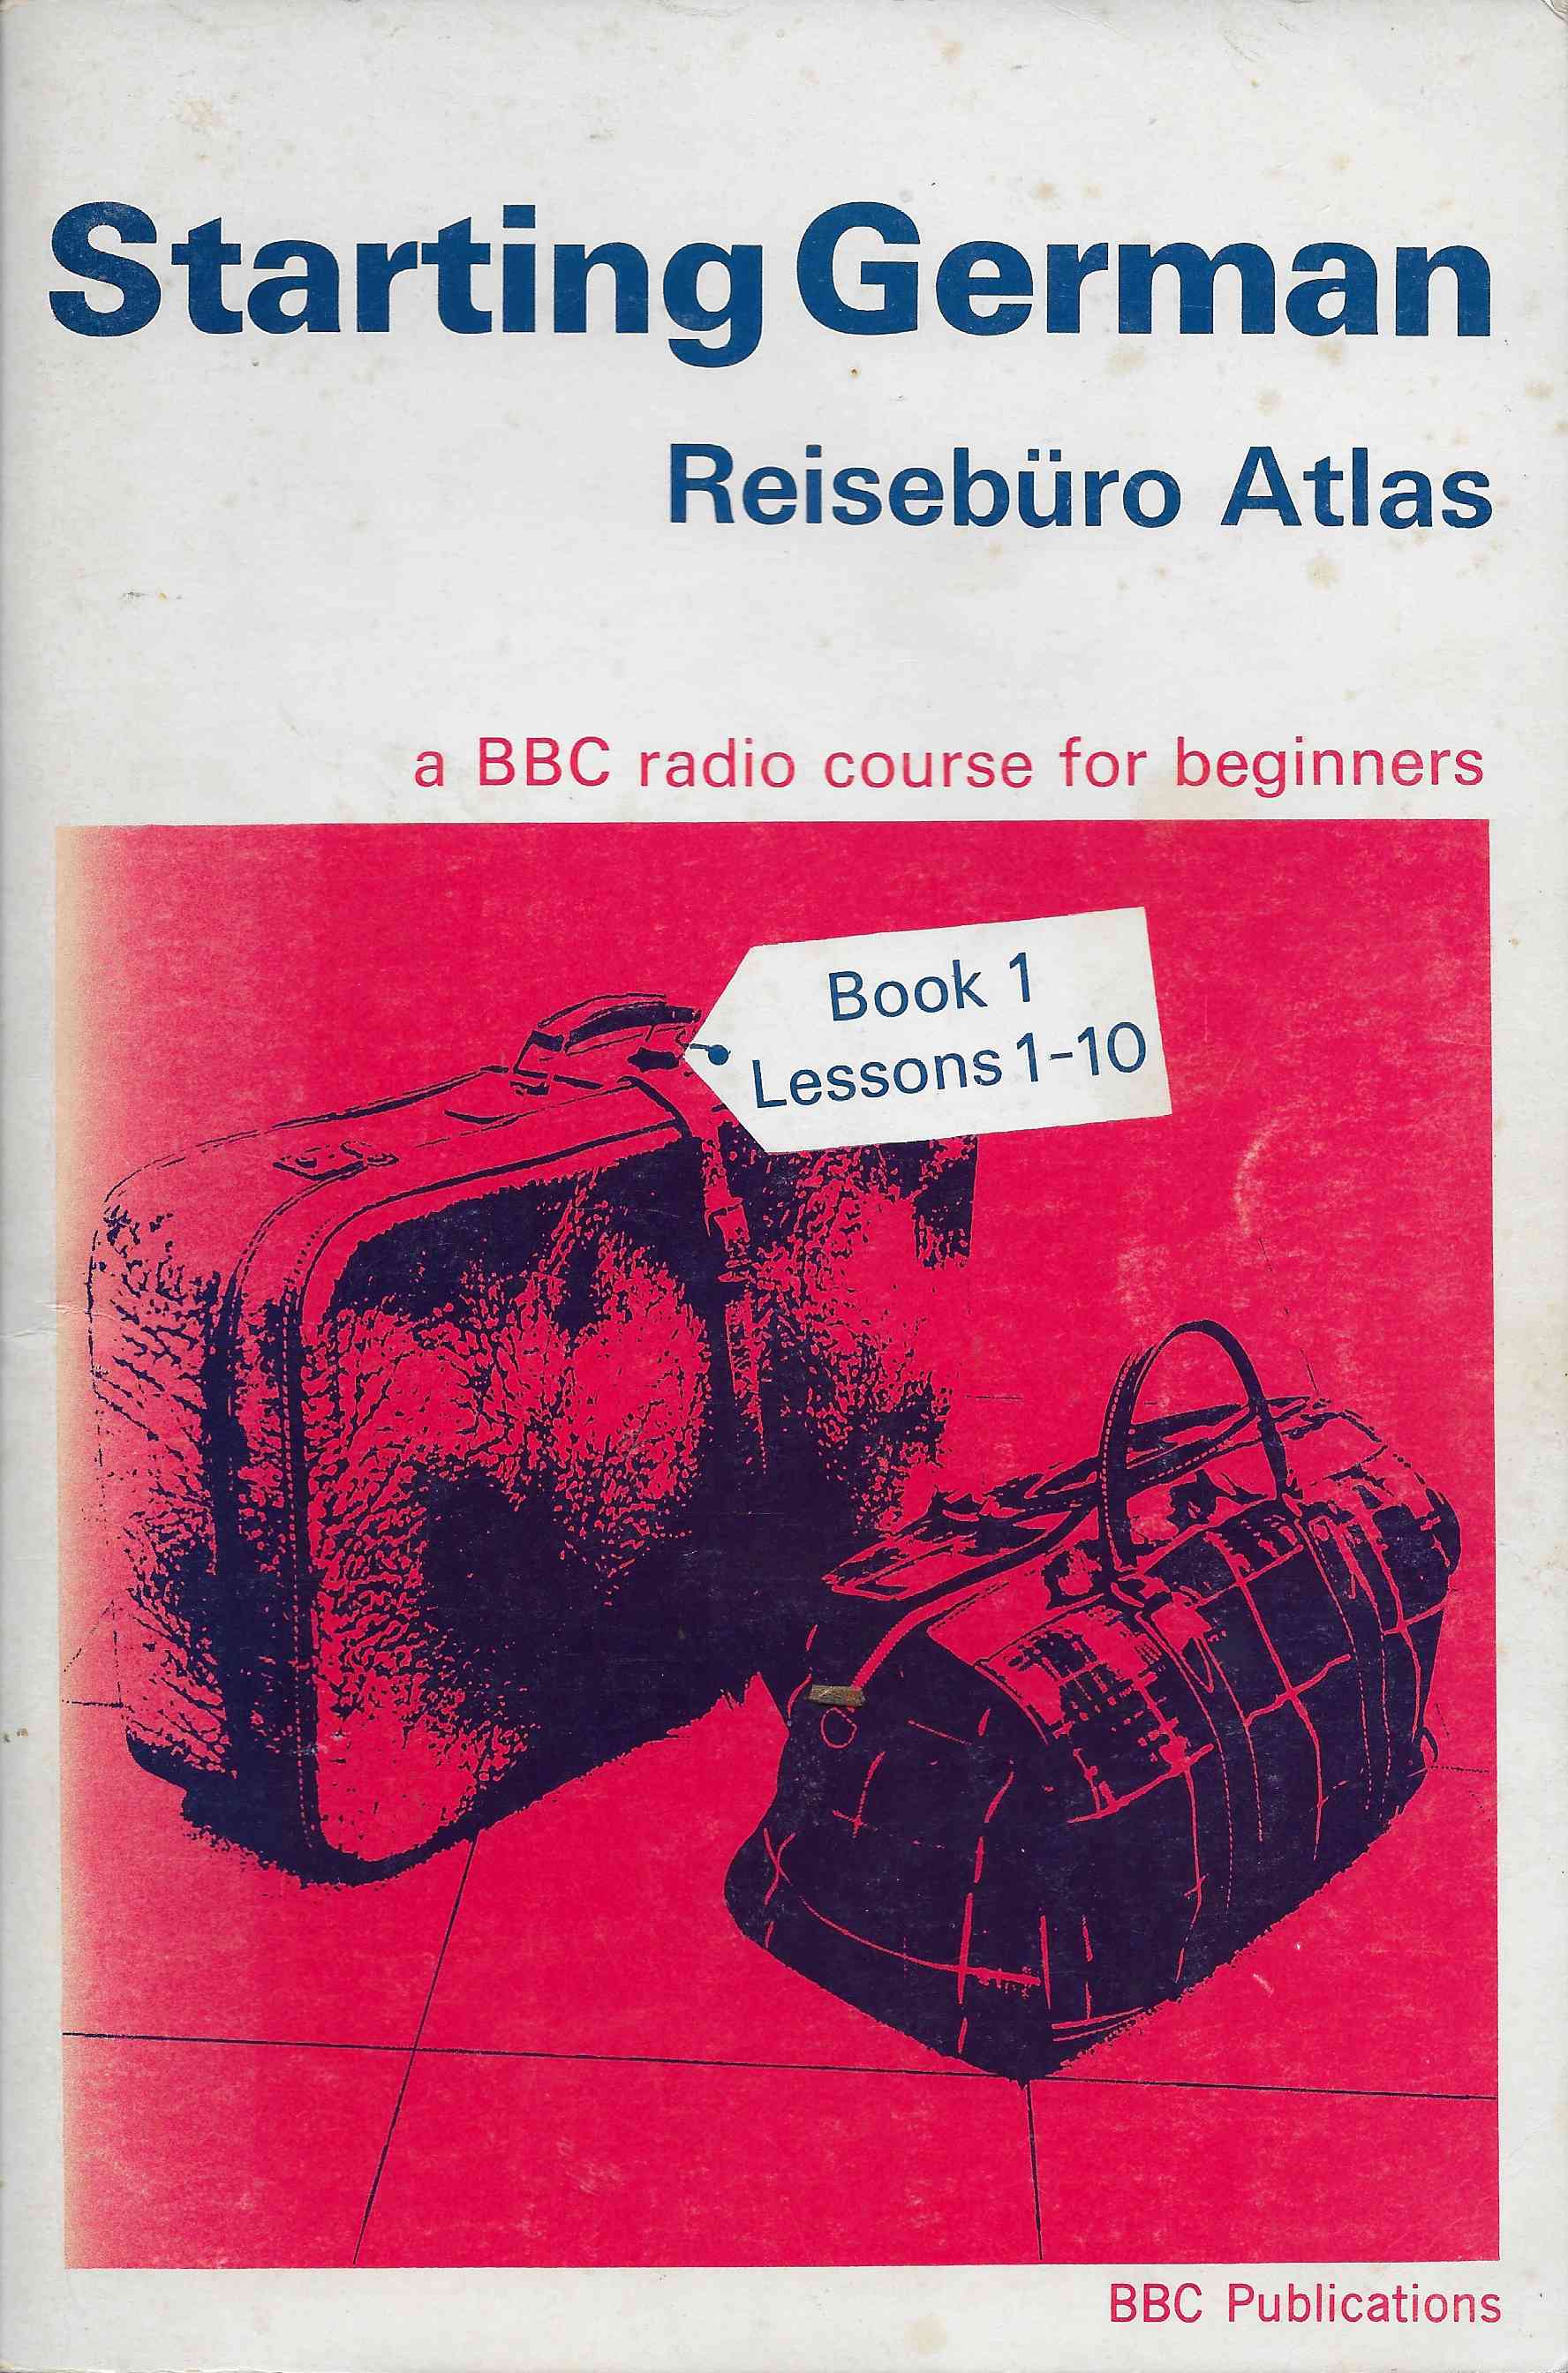 Picture of SBN 563 08337 9 Starting German - Book 1 by artist R. M. Oldnall / Edith R. Baer from the BBC books - Records and Tapes library